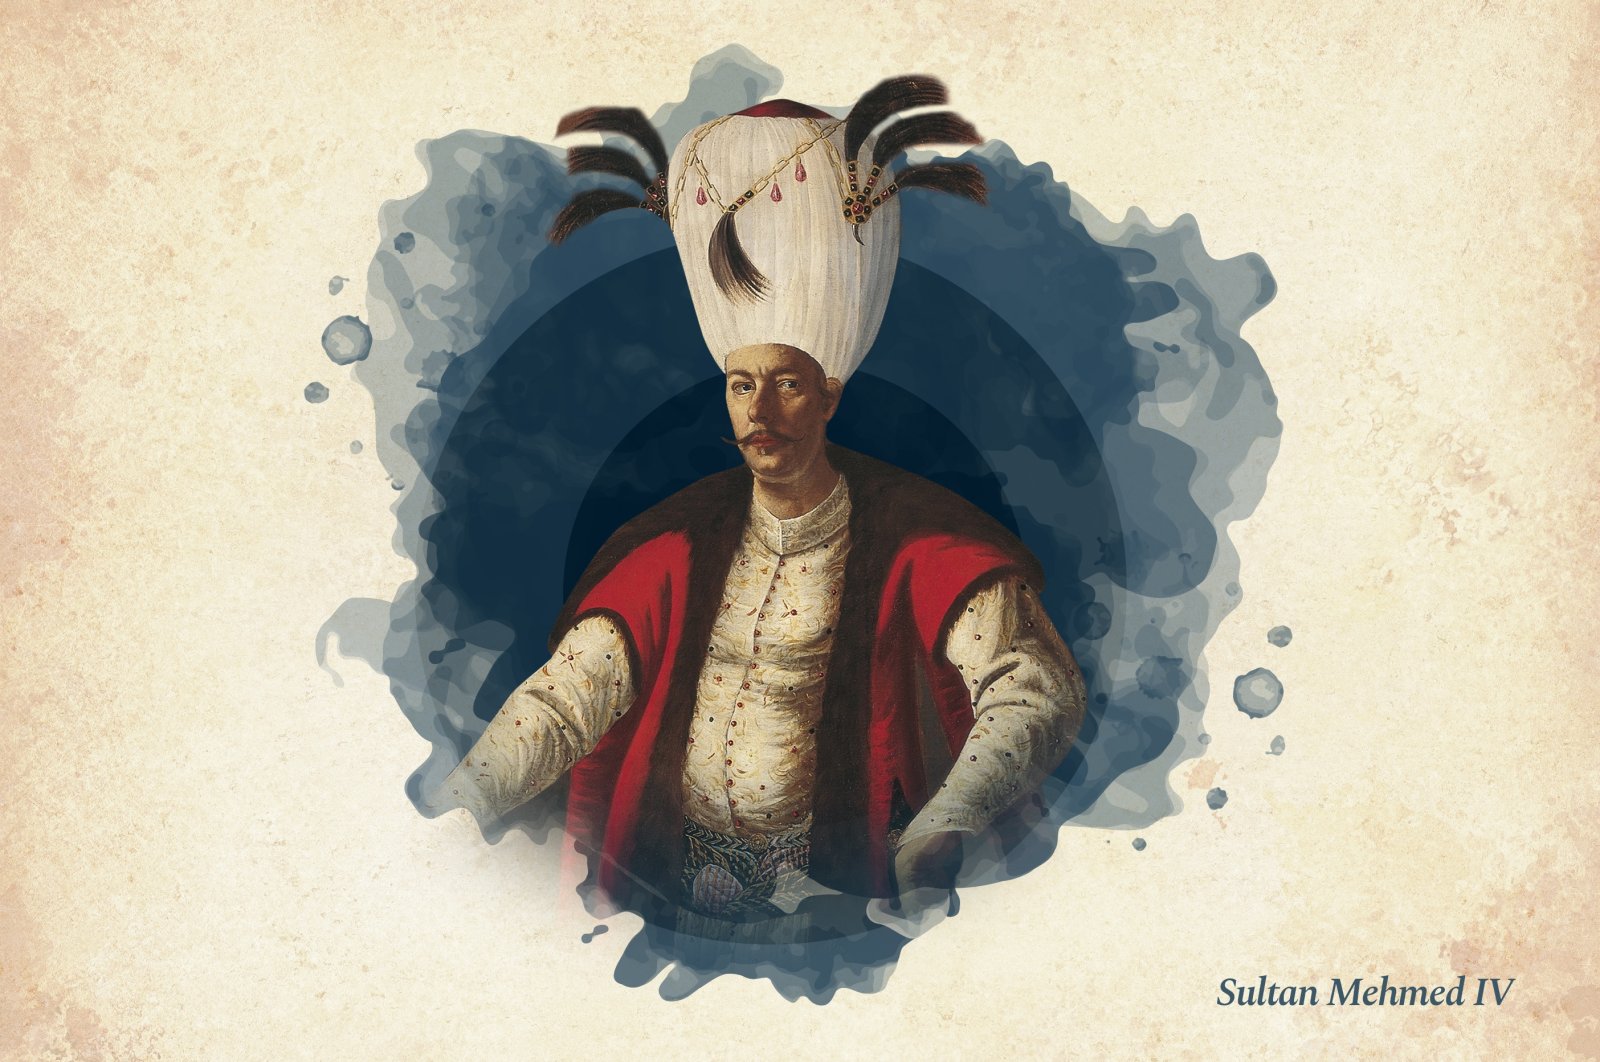 This widely used illustration shows Sultan Mehmed IV, the 19th ruler of the Ottoman Empire. (Wikimedia / Edited by Büşra Öztürk)